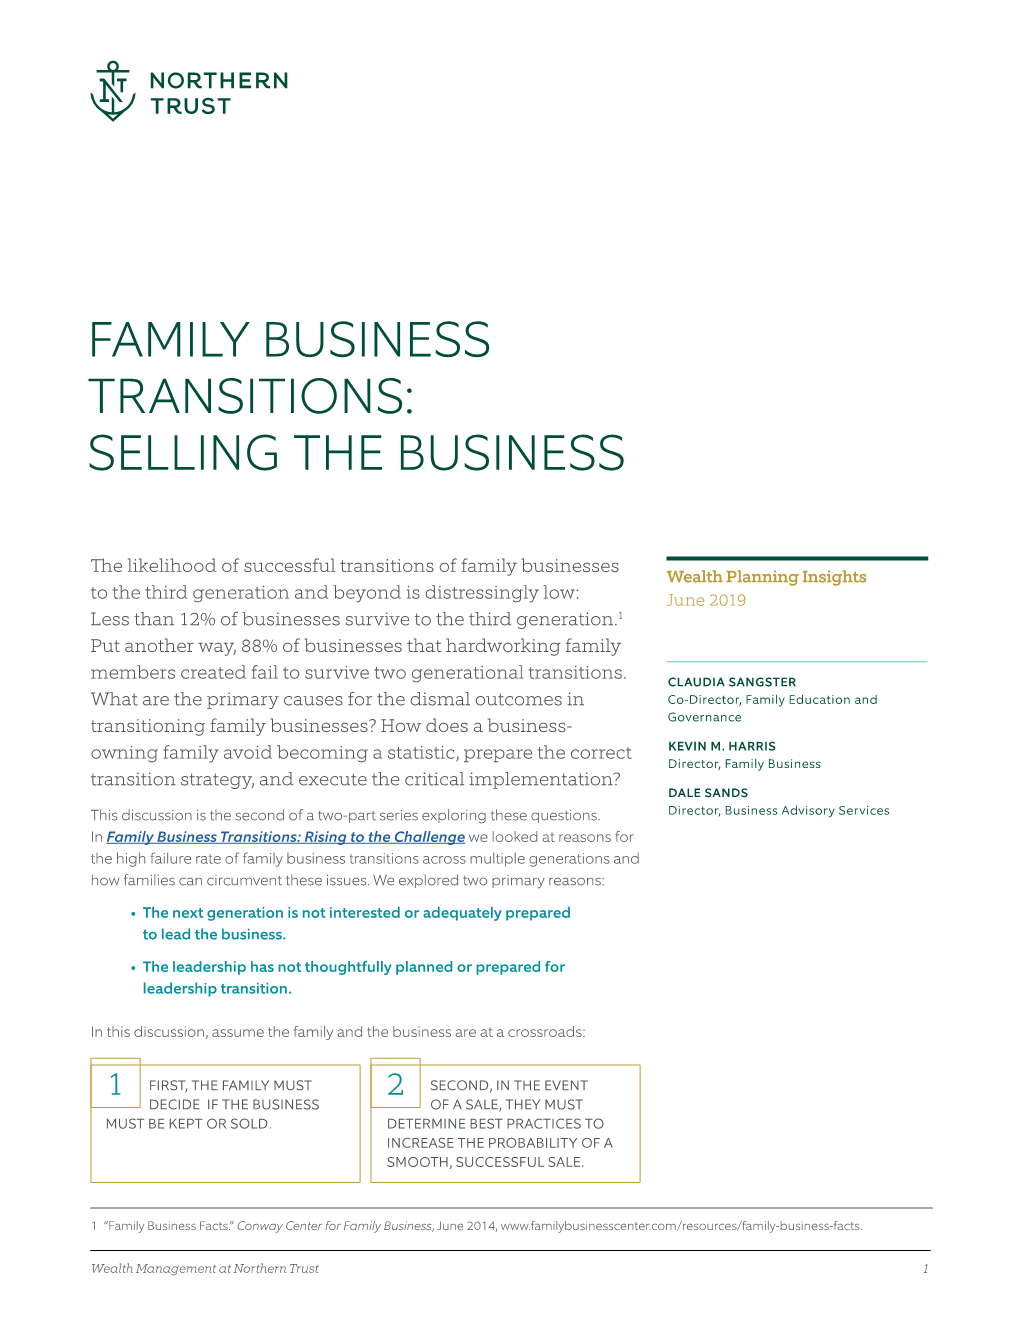 Family Business Transitions: Selling the Business